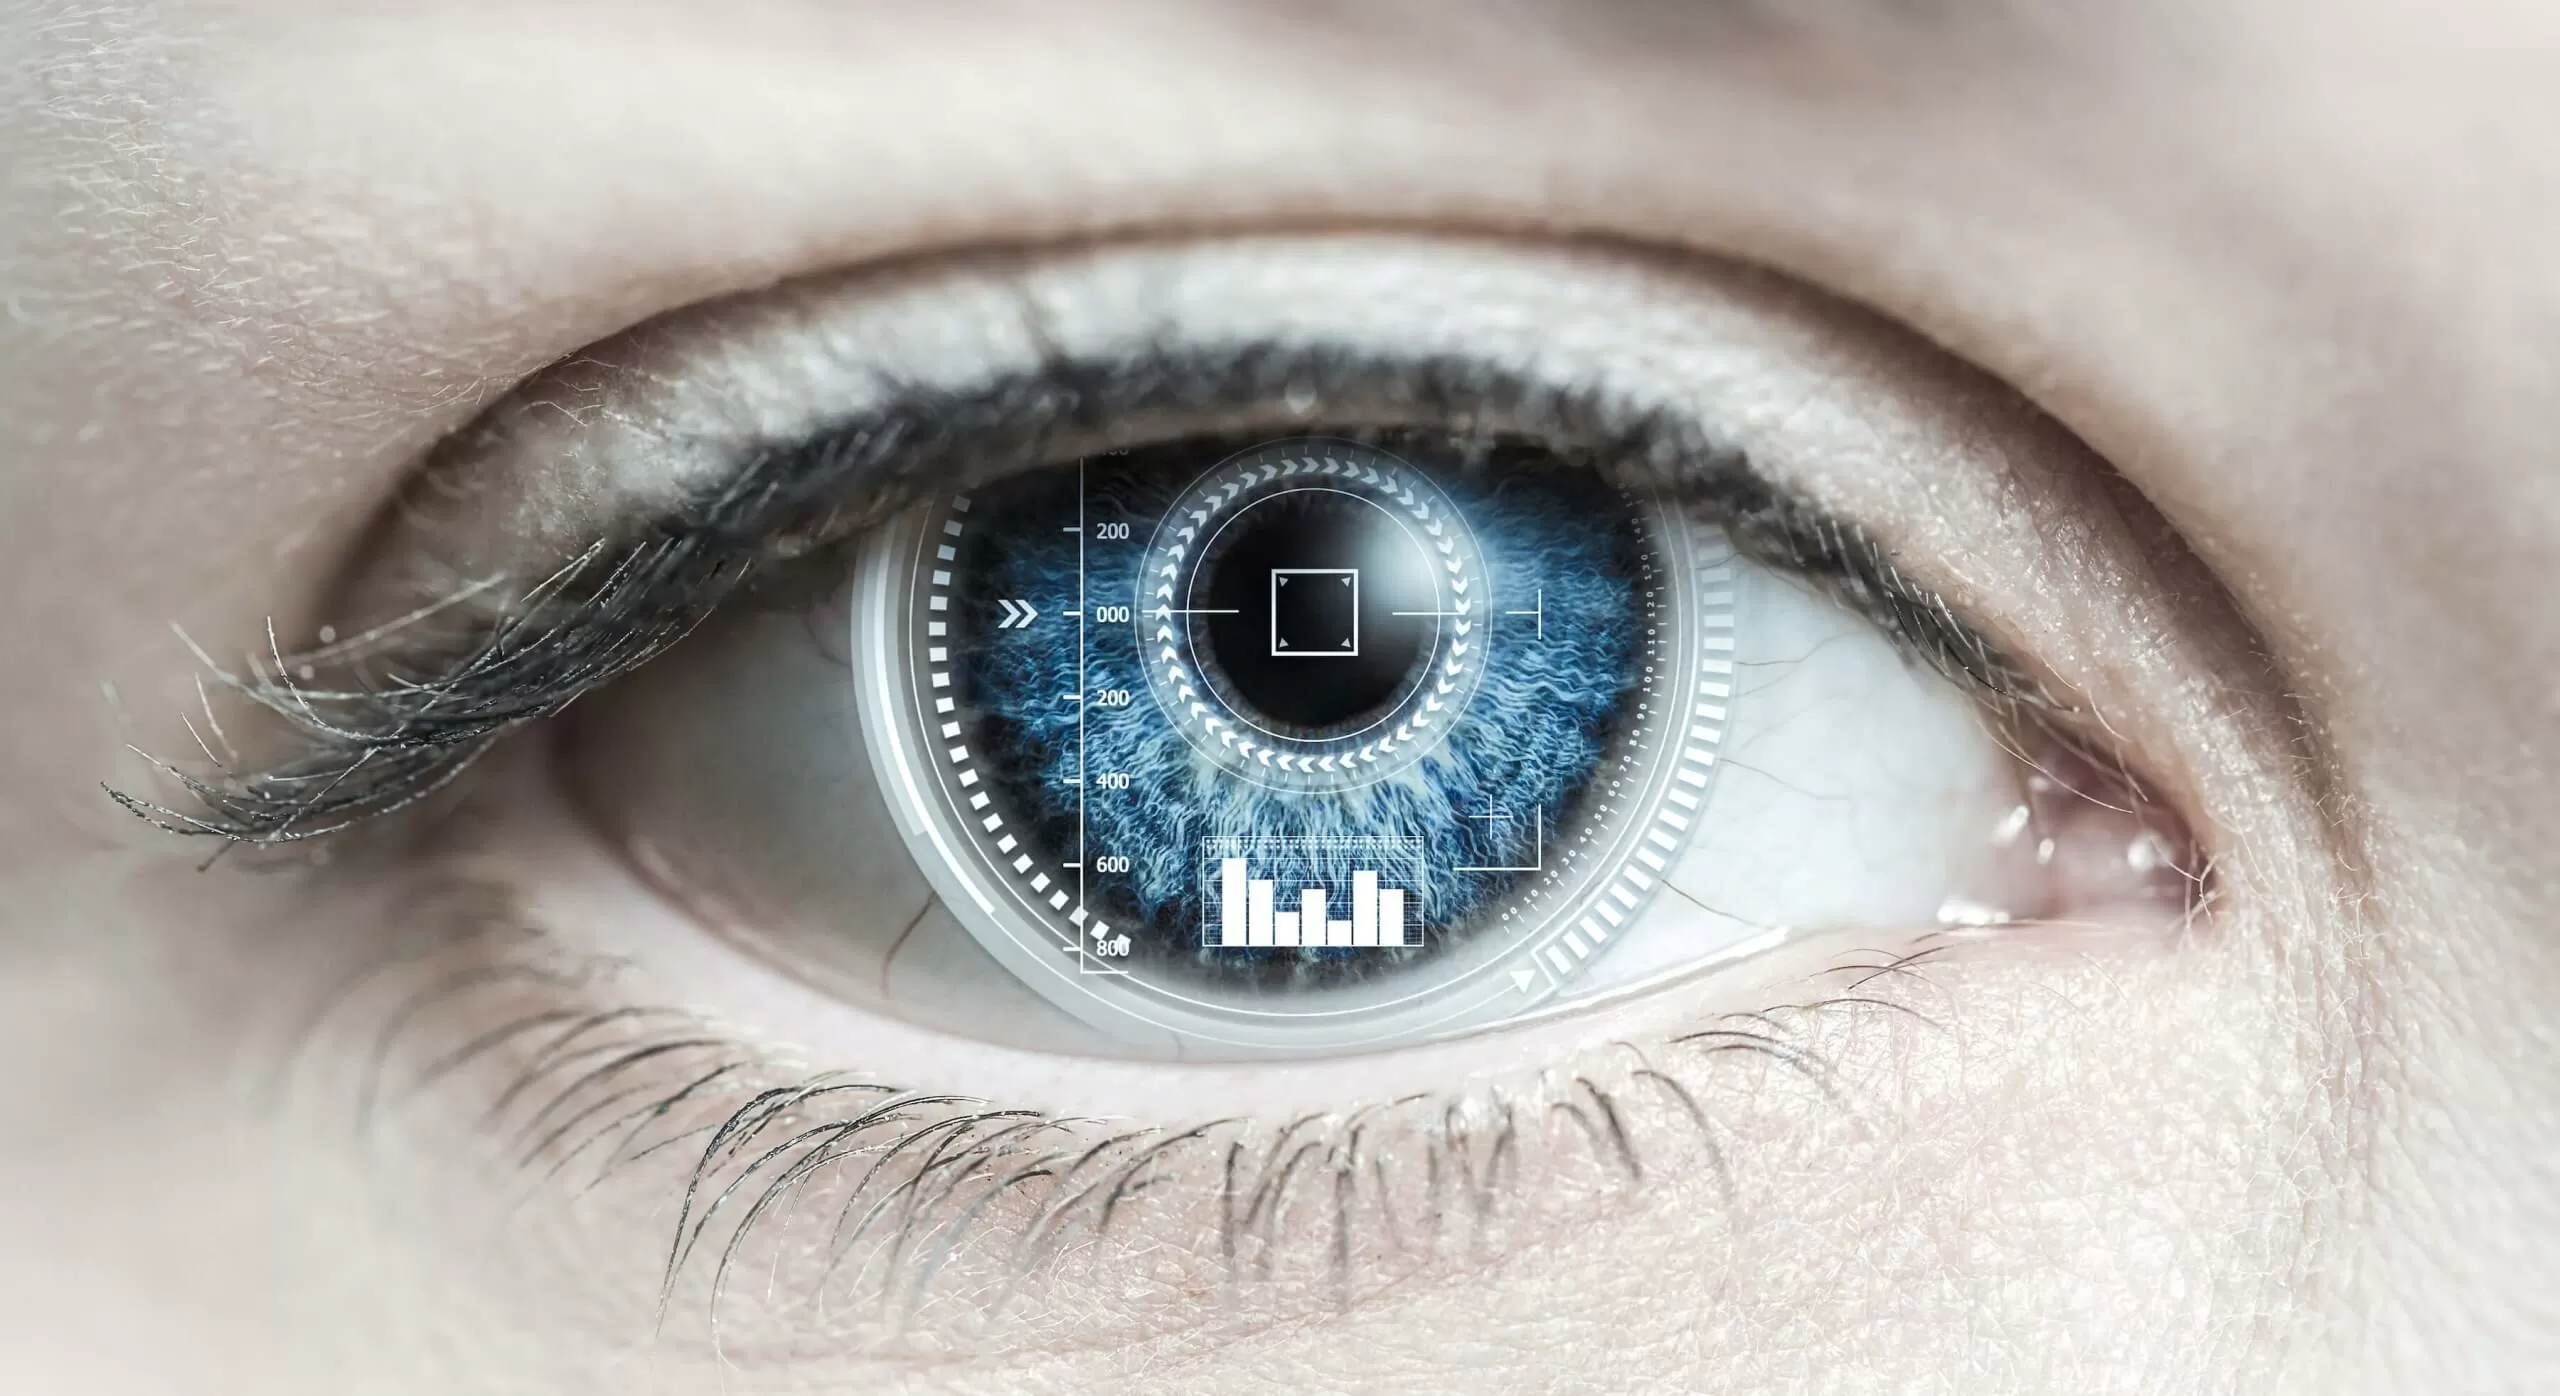 A new human-like bionic eye offers potential in robotics and human augmentation